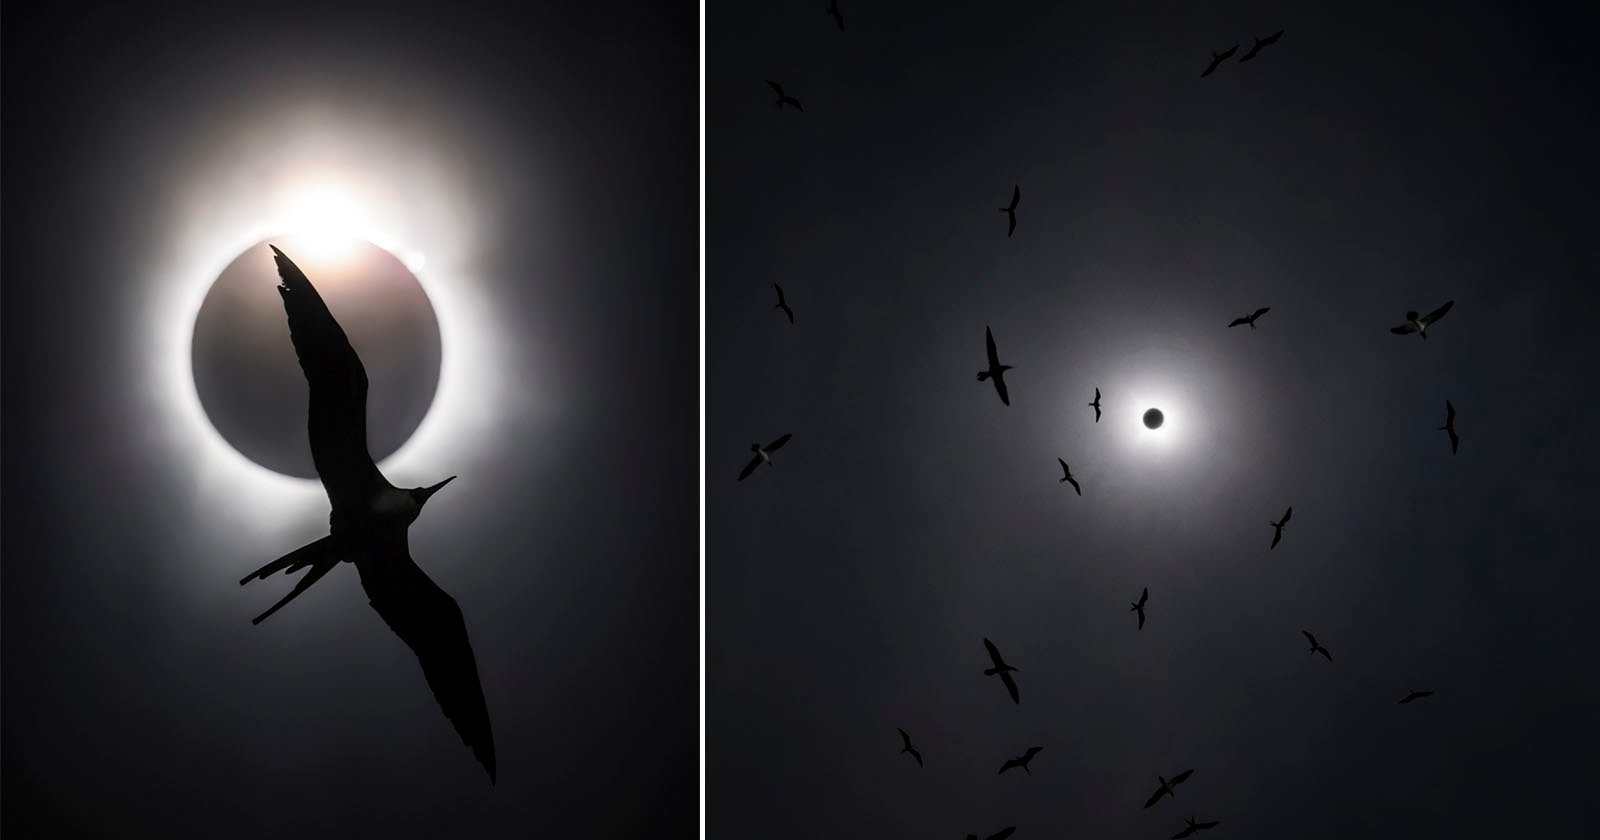 How a Photographer Captured His Spectacular Dream Eclipse Photo